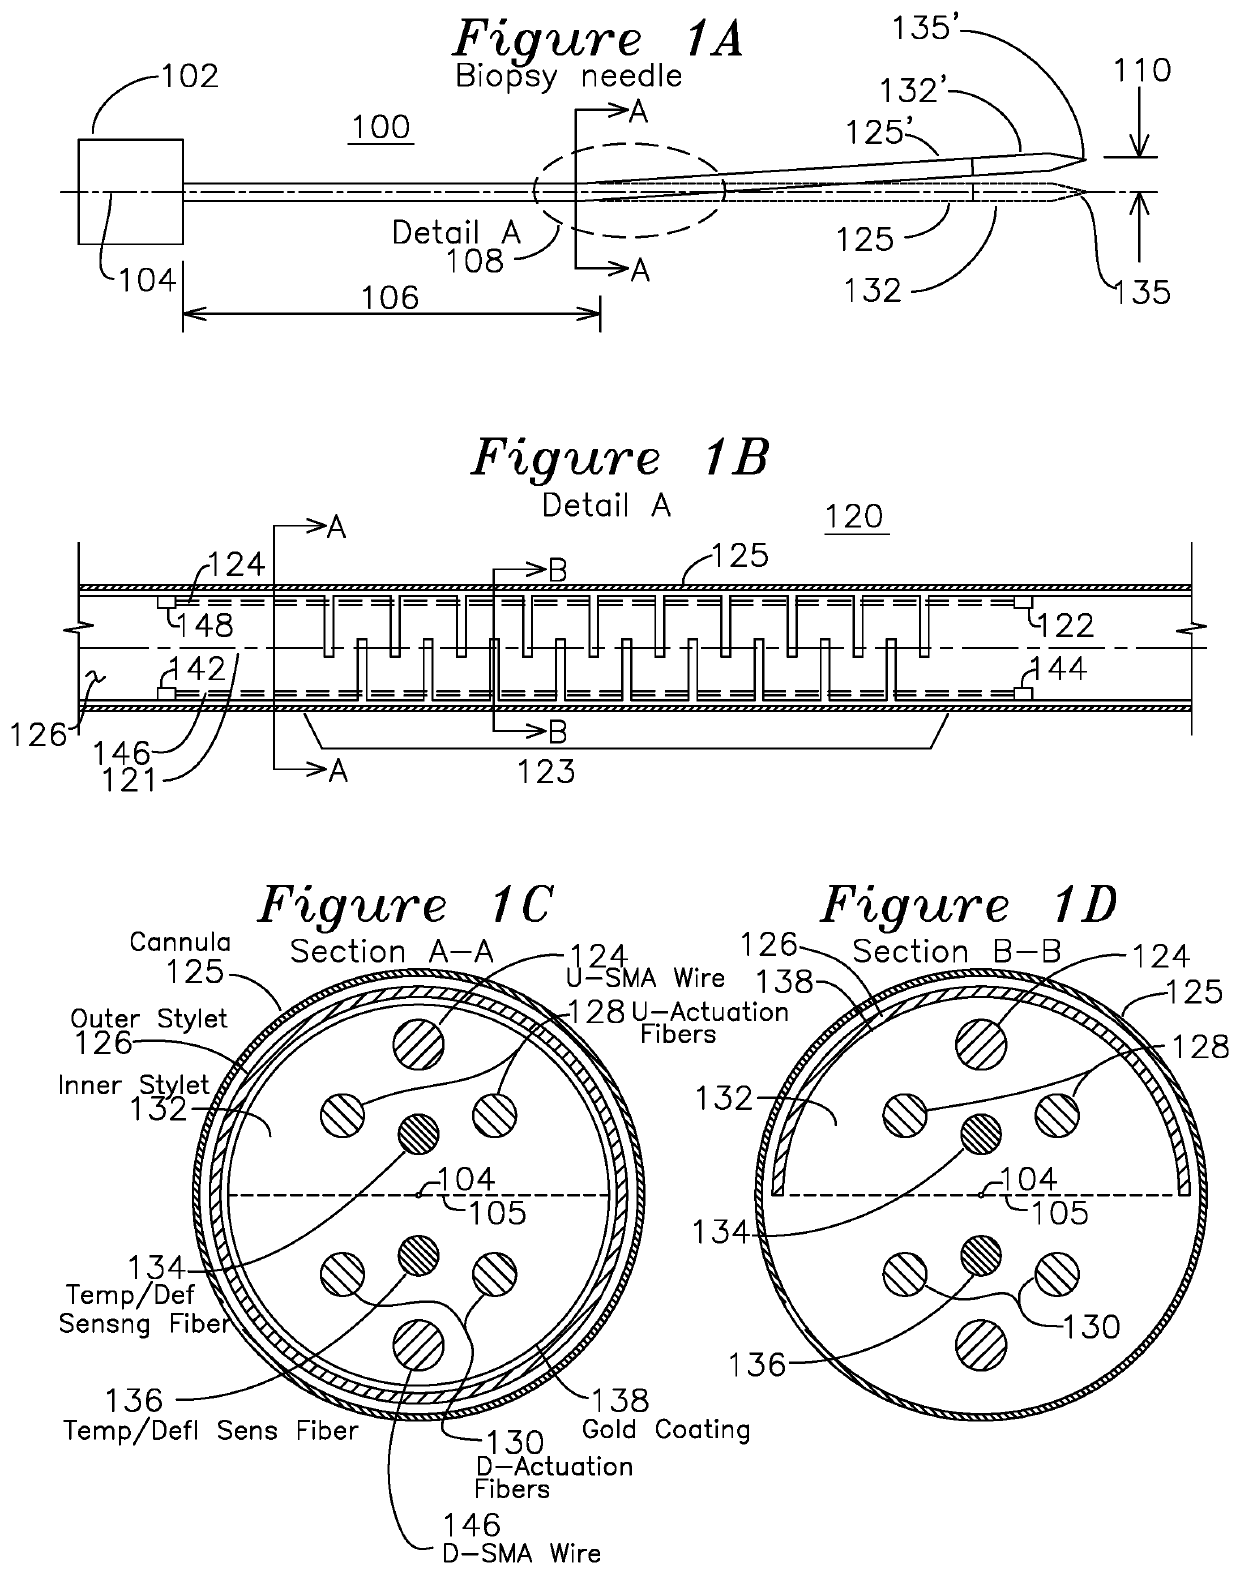 Steerable Biopsy Needle with Fiber-Activated Shape Memory Alloy